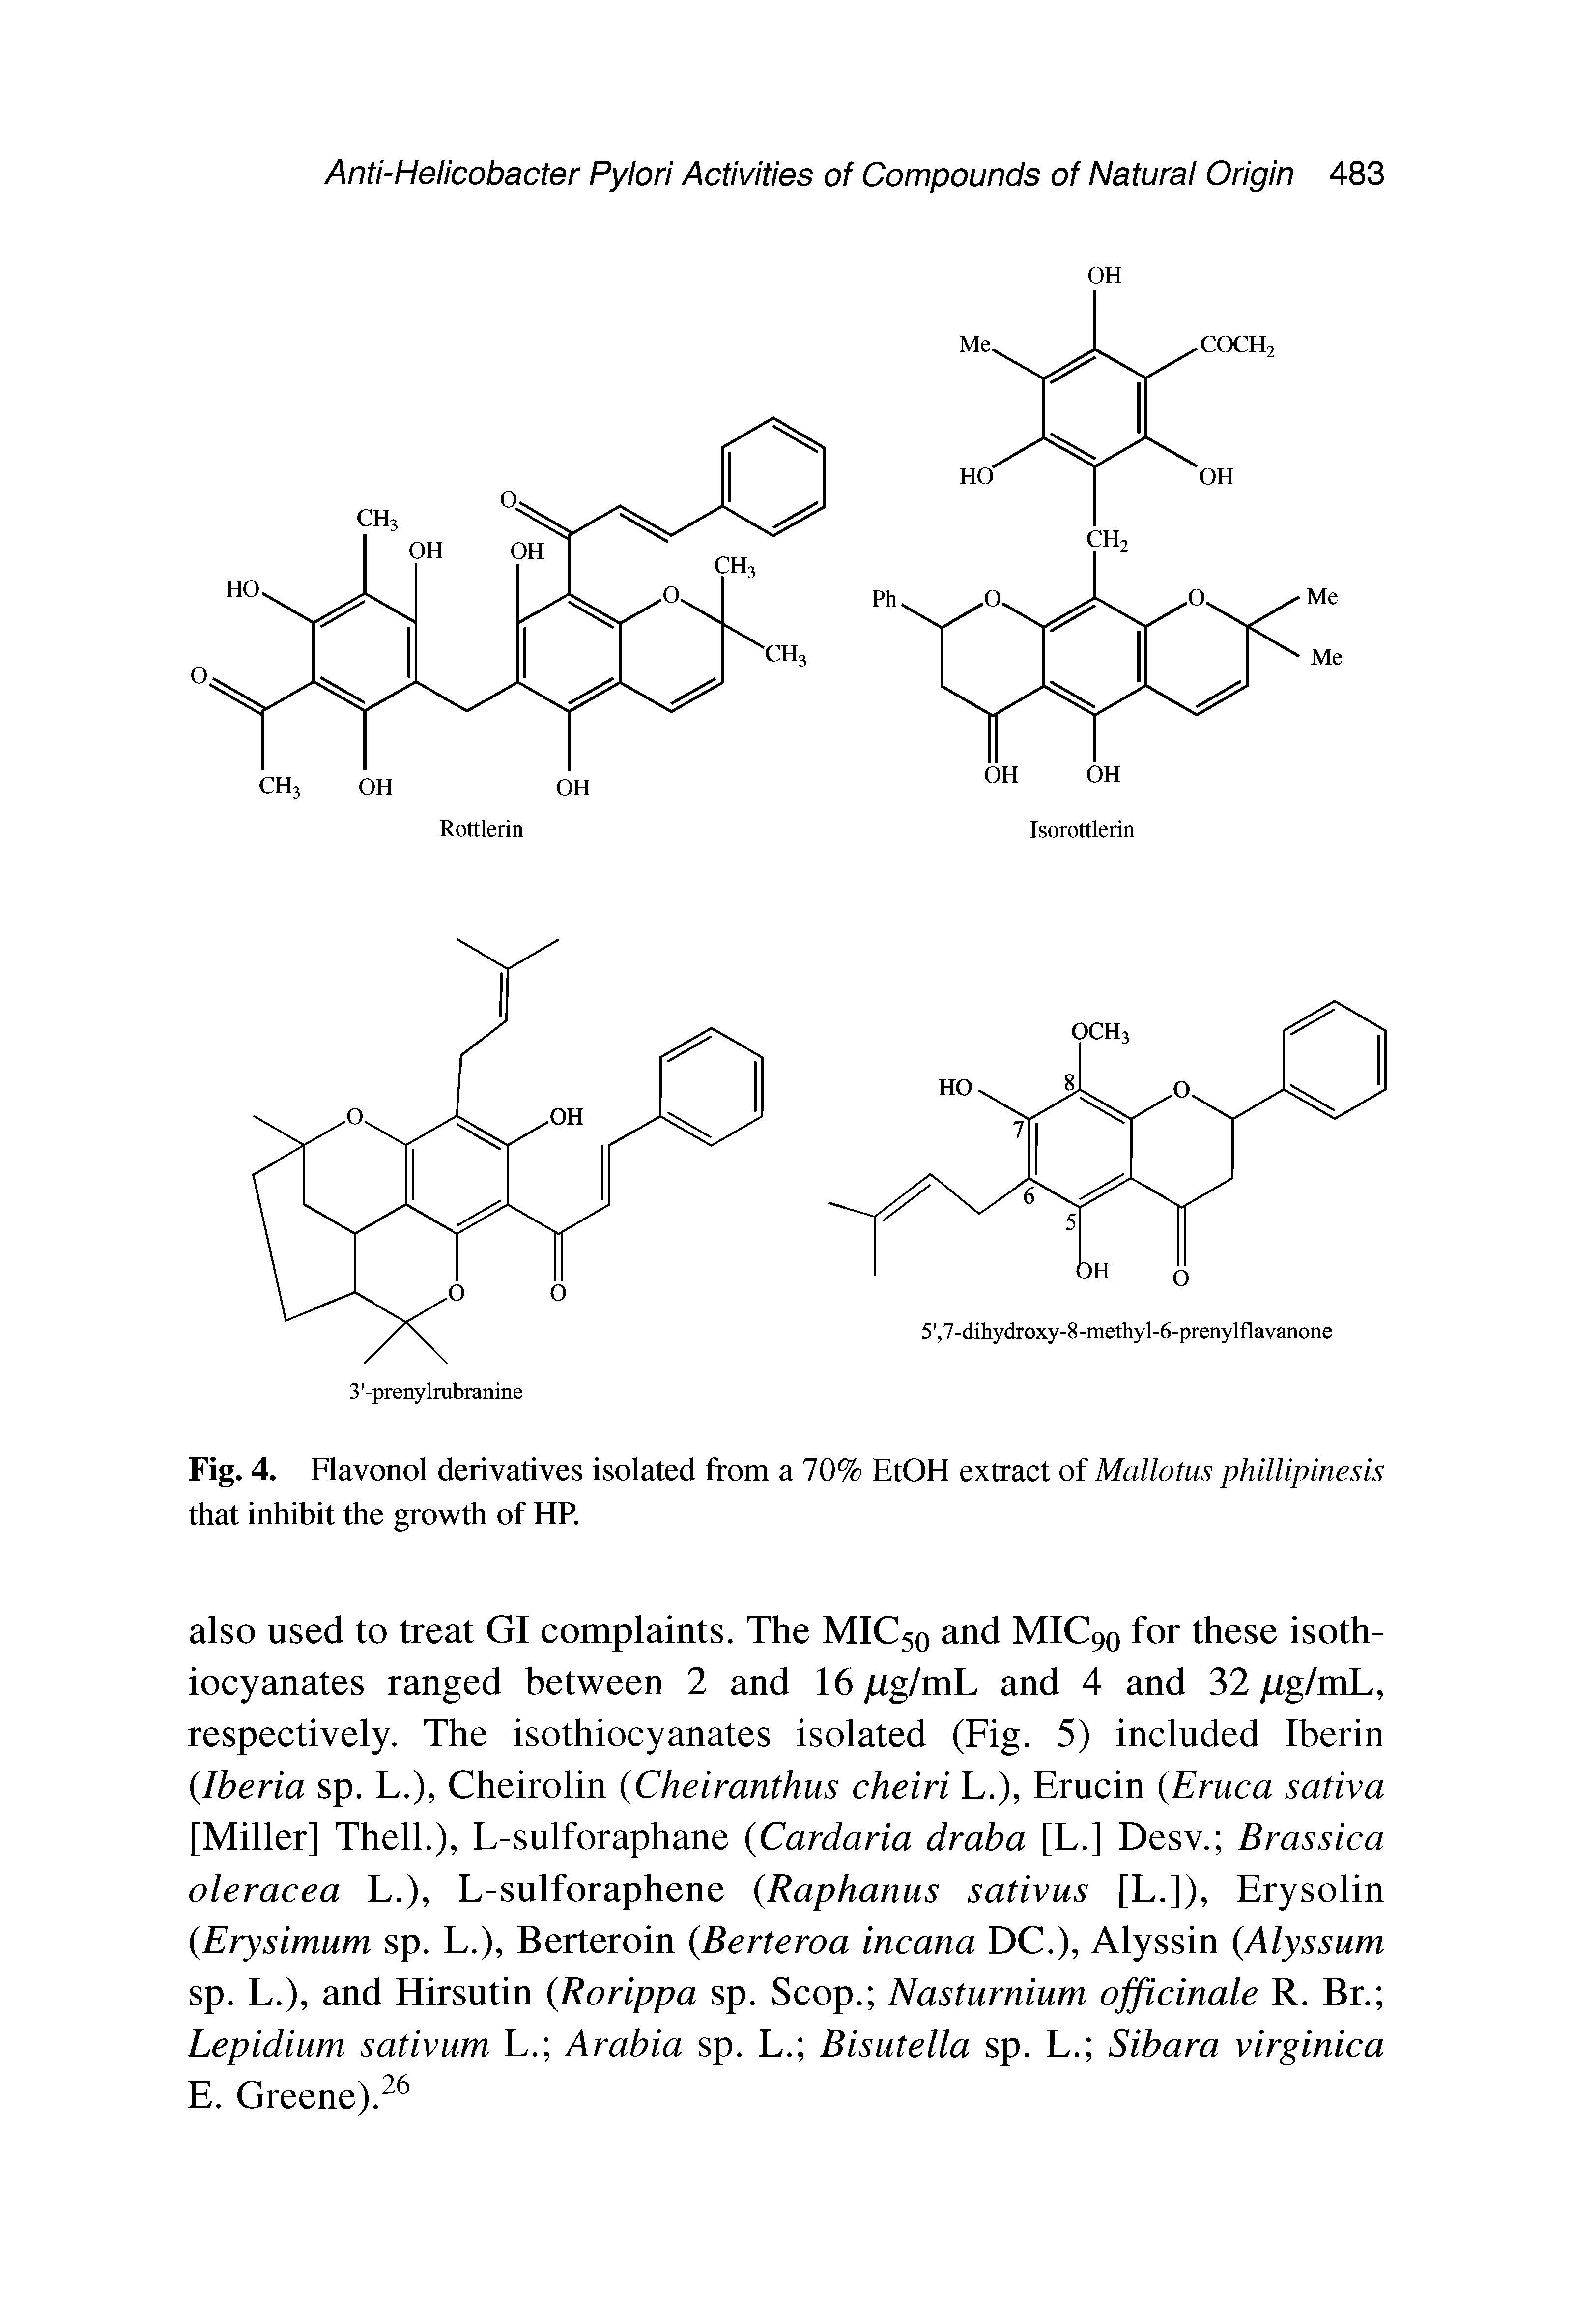 Fig. 4. Ravonol derivatives isolated from a 70% EtOH extract of Mallotus phillipinesis that inhibit the growth of HR...